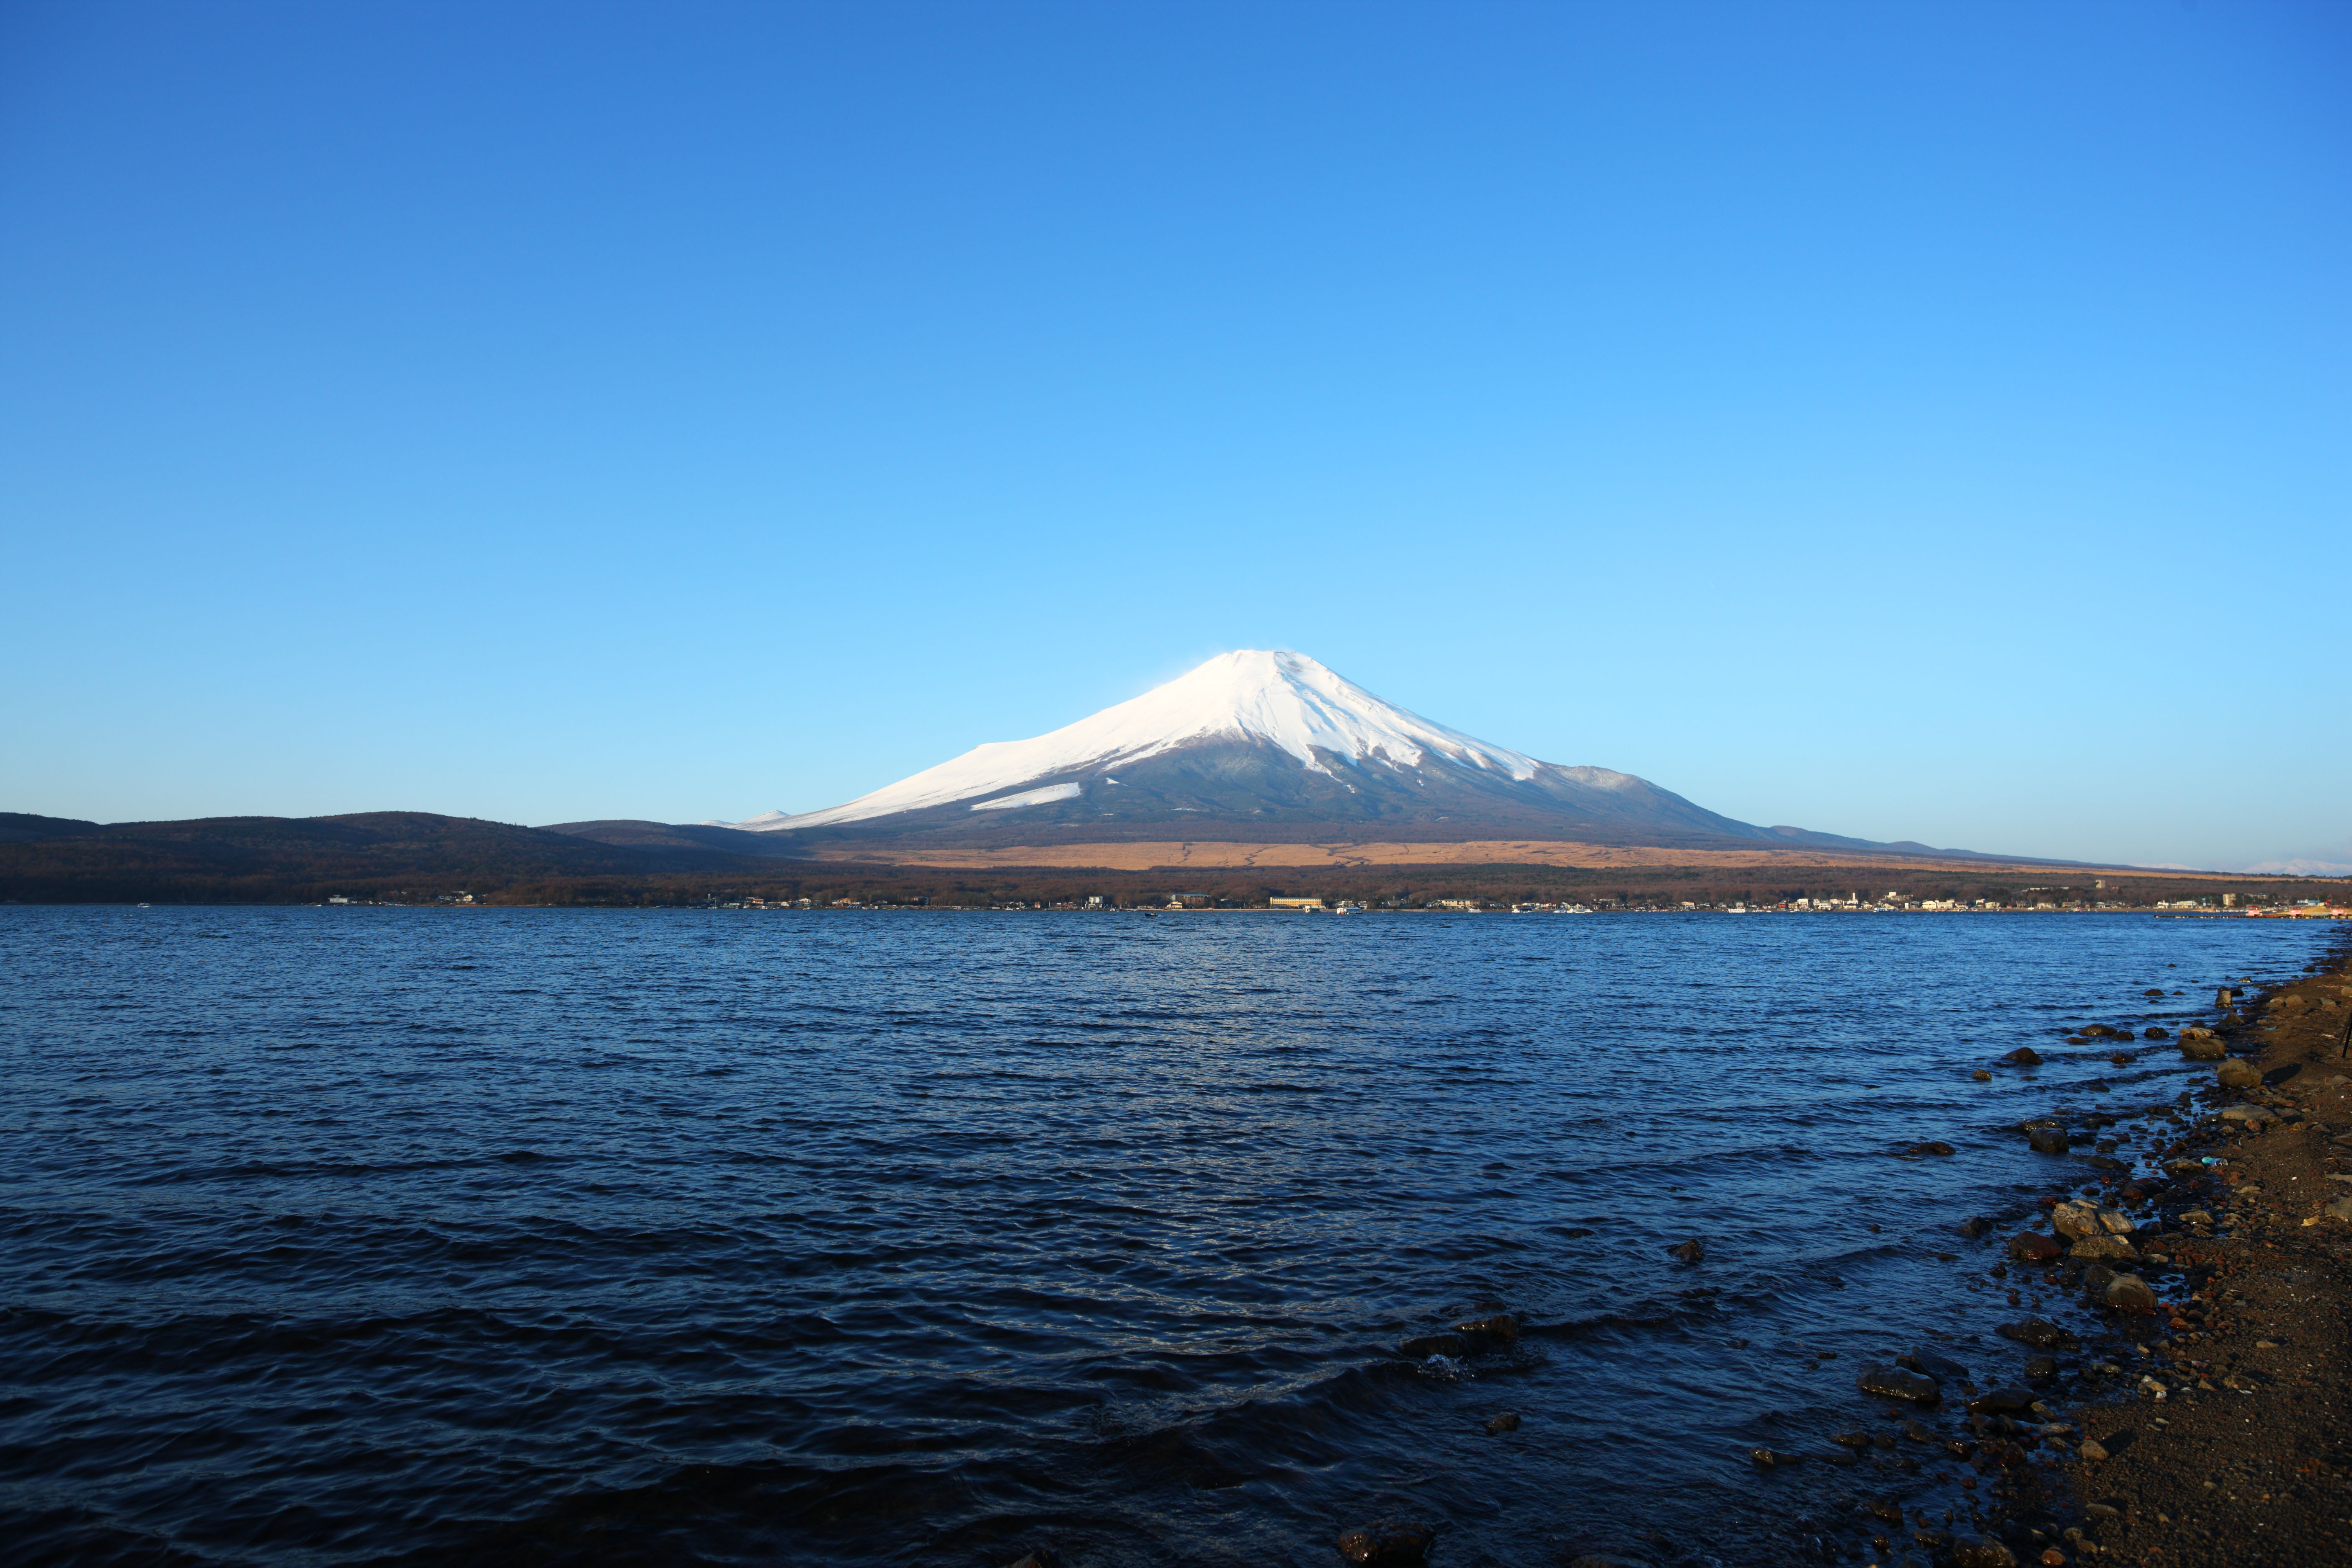 photo,material,free,landscape,picture,stock photo,Creative Commons,Mt. Fuji, Fujiyama, The snowy mountains, surface of a lake, blue sky